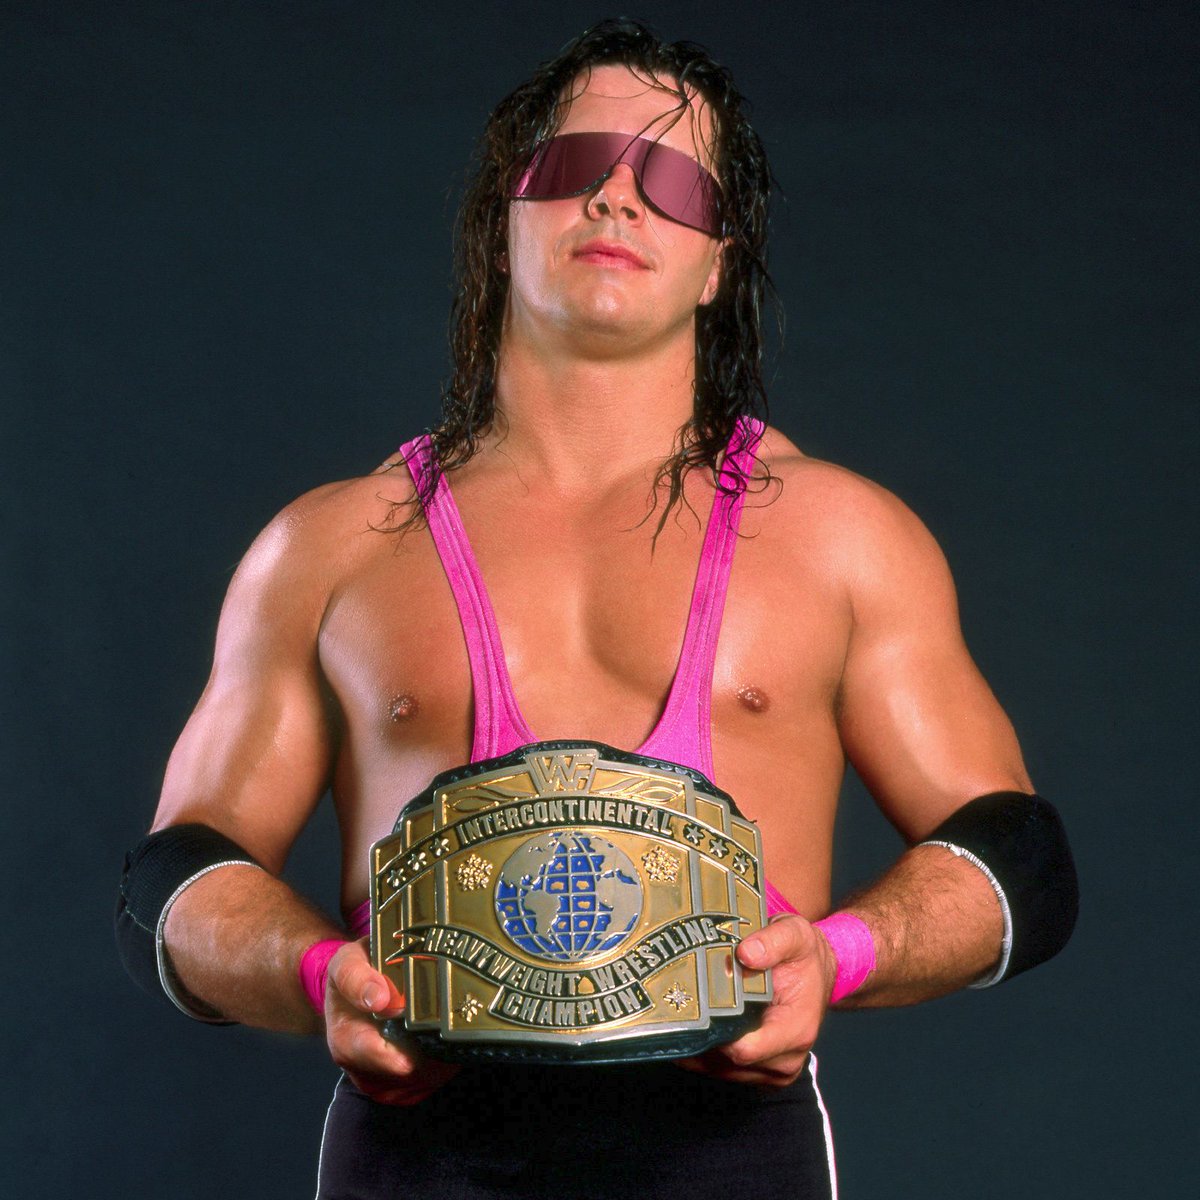 Intercontinental Champion of the day: Bret 'Hitman' Hart - Claimed the title at SummerSlam on August 26, 1991. His first title reign lasted 144 days. 🏆 #WWF #WWE #Wrestling #BretHart